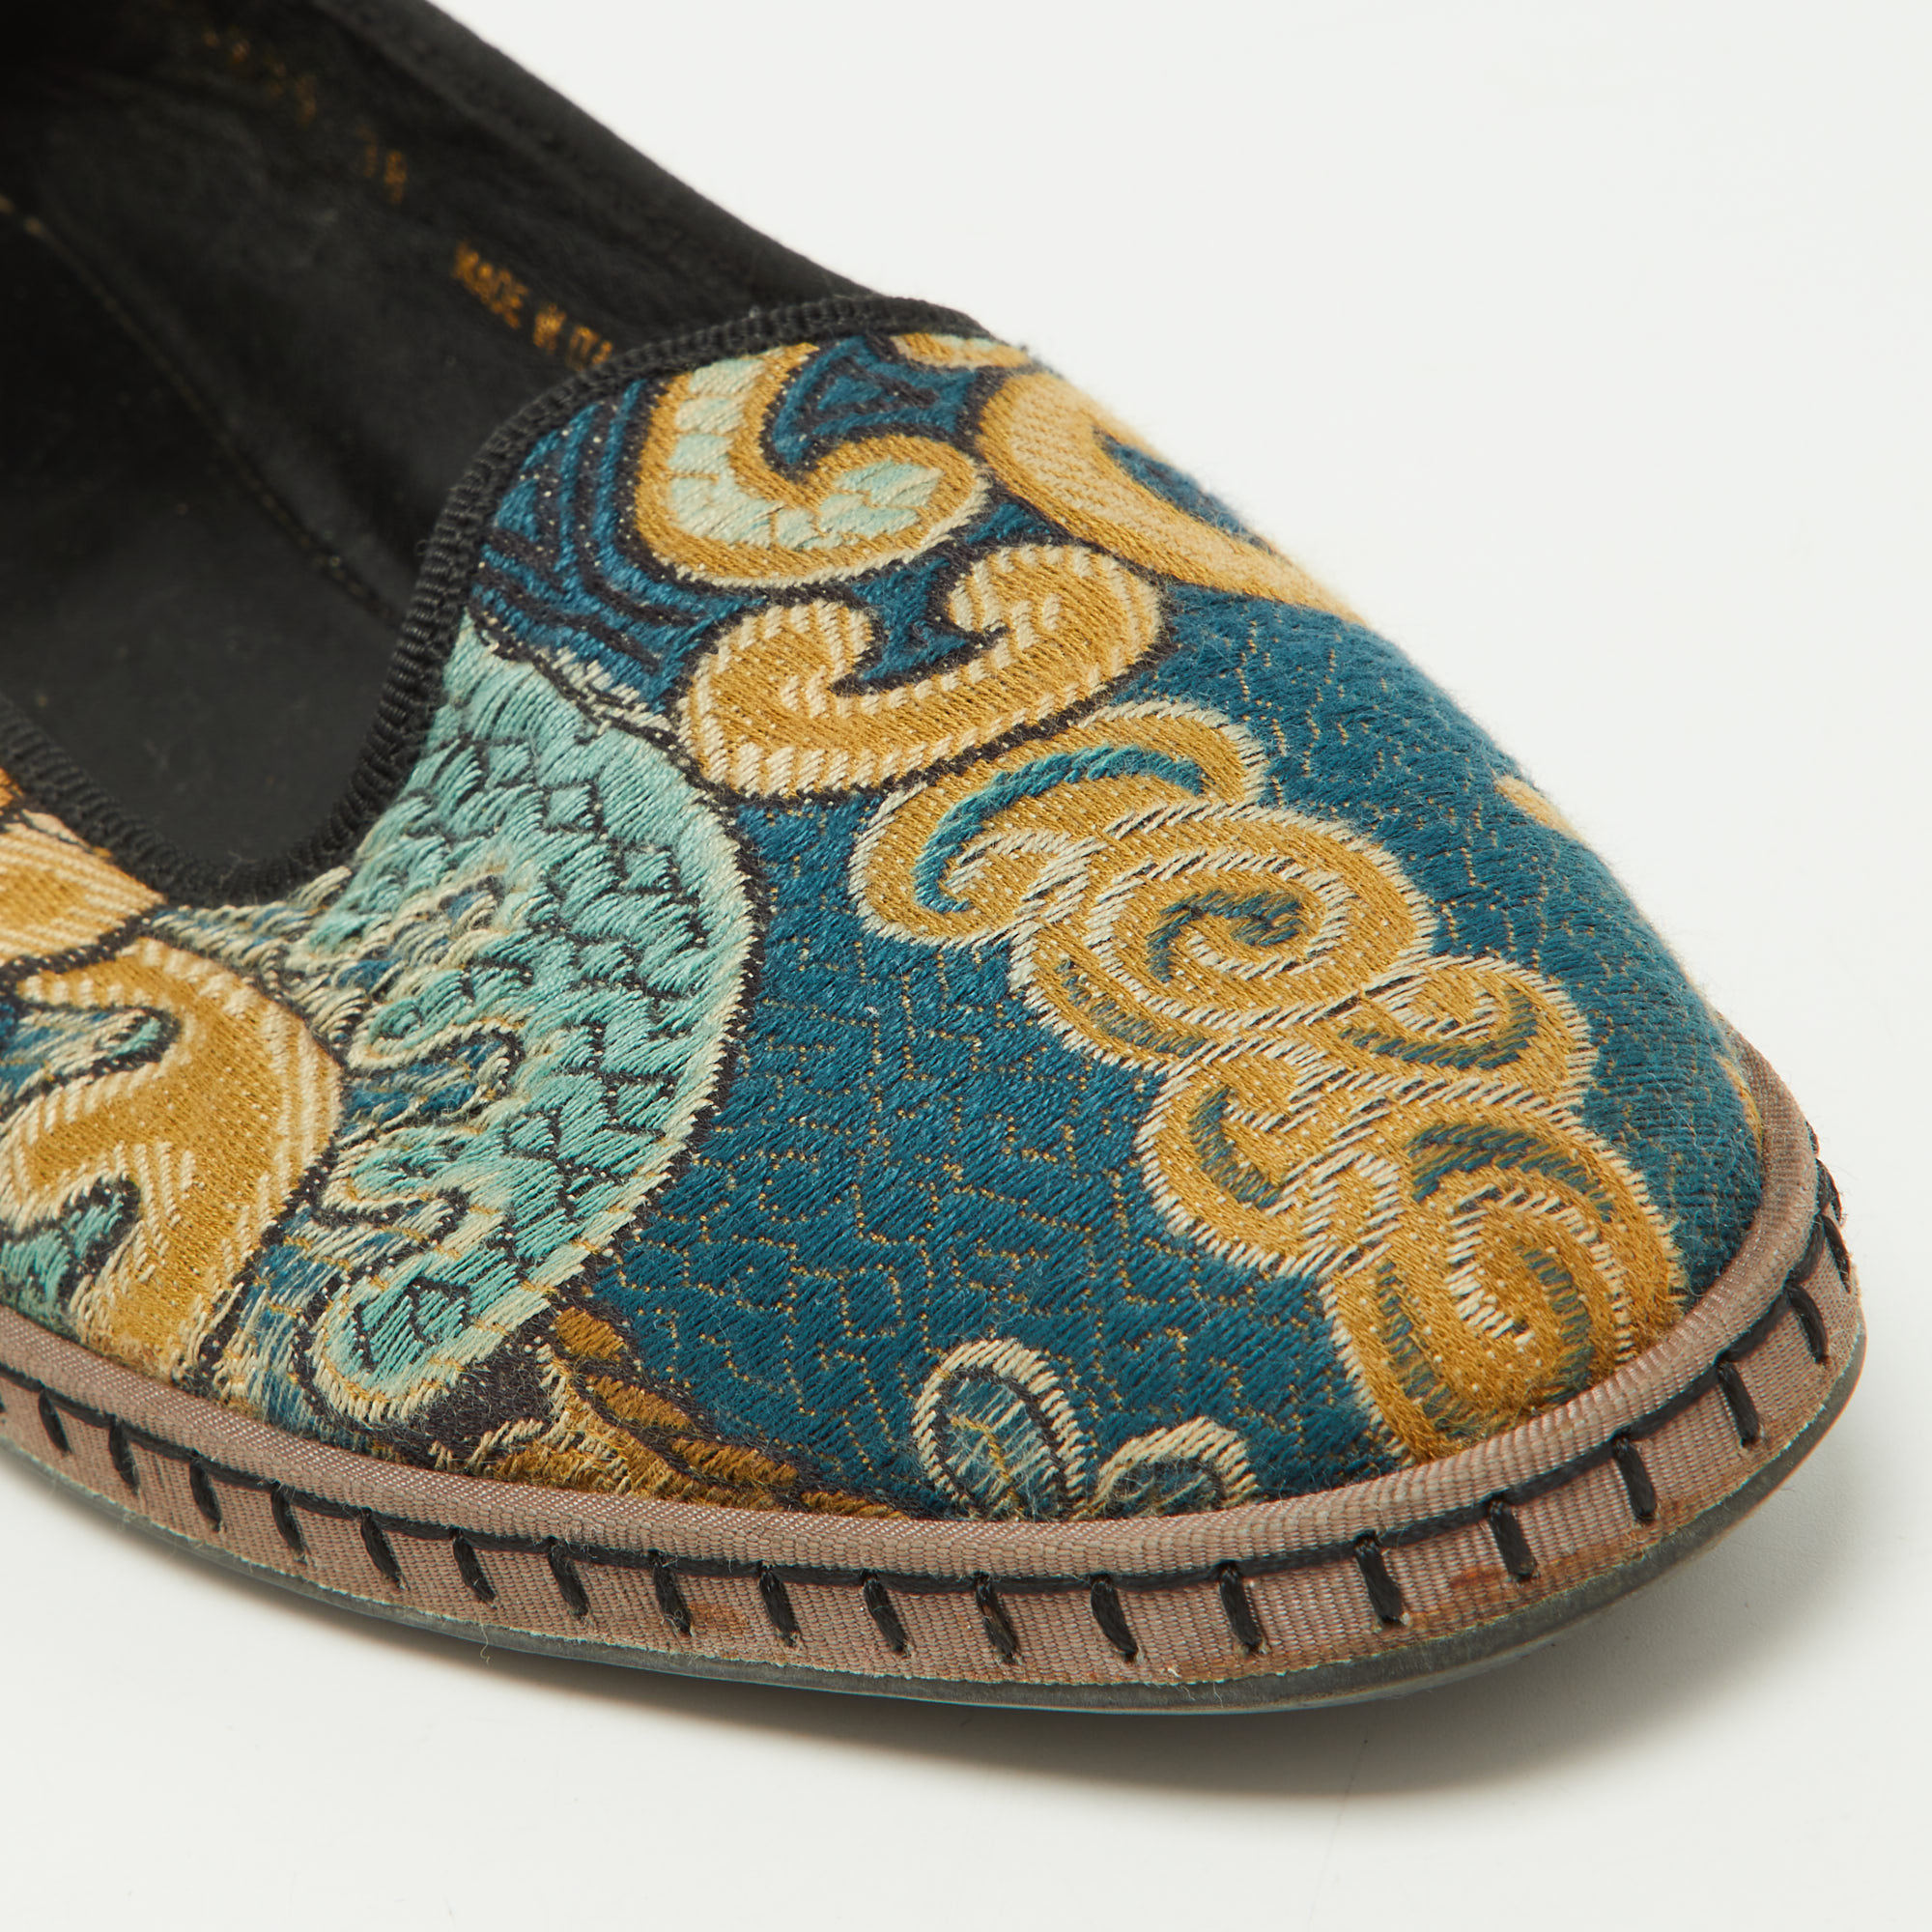 Etro Multicolor Embroidered Fabric Smoking Slippers Size 38